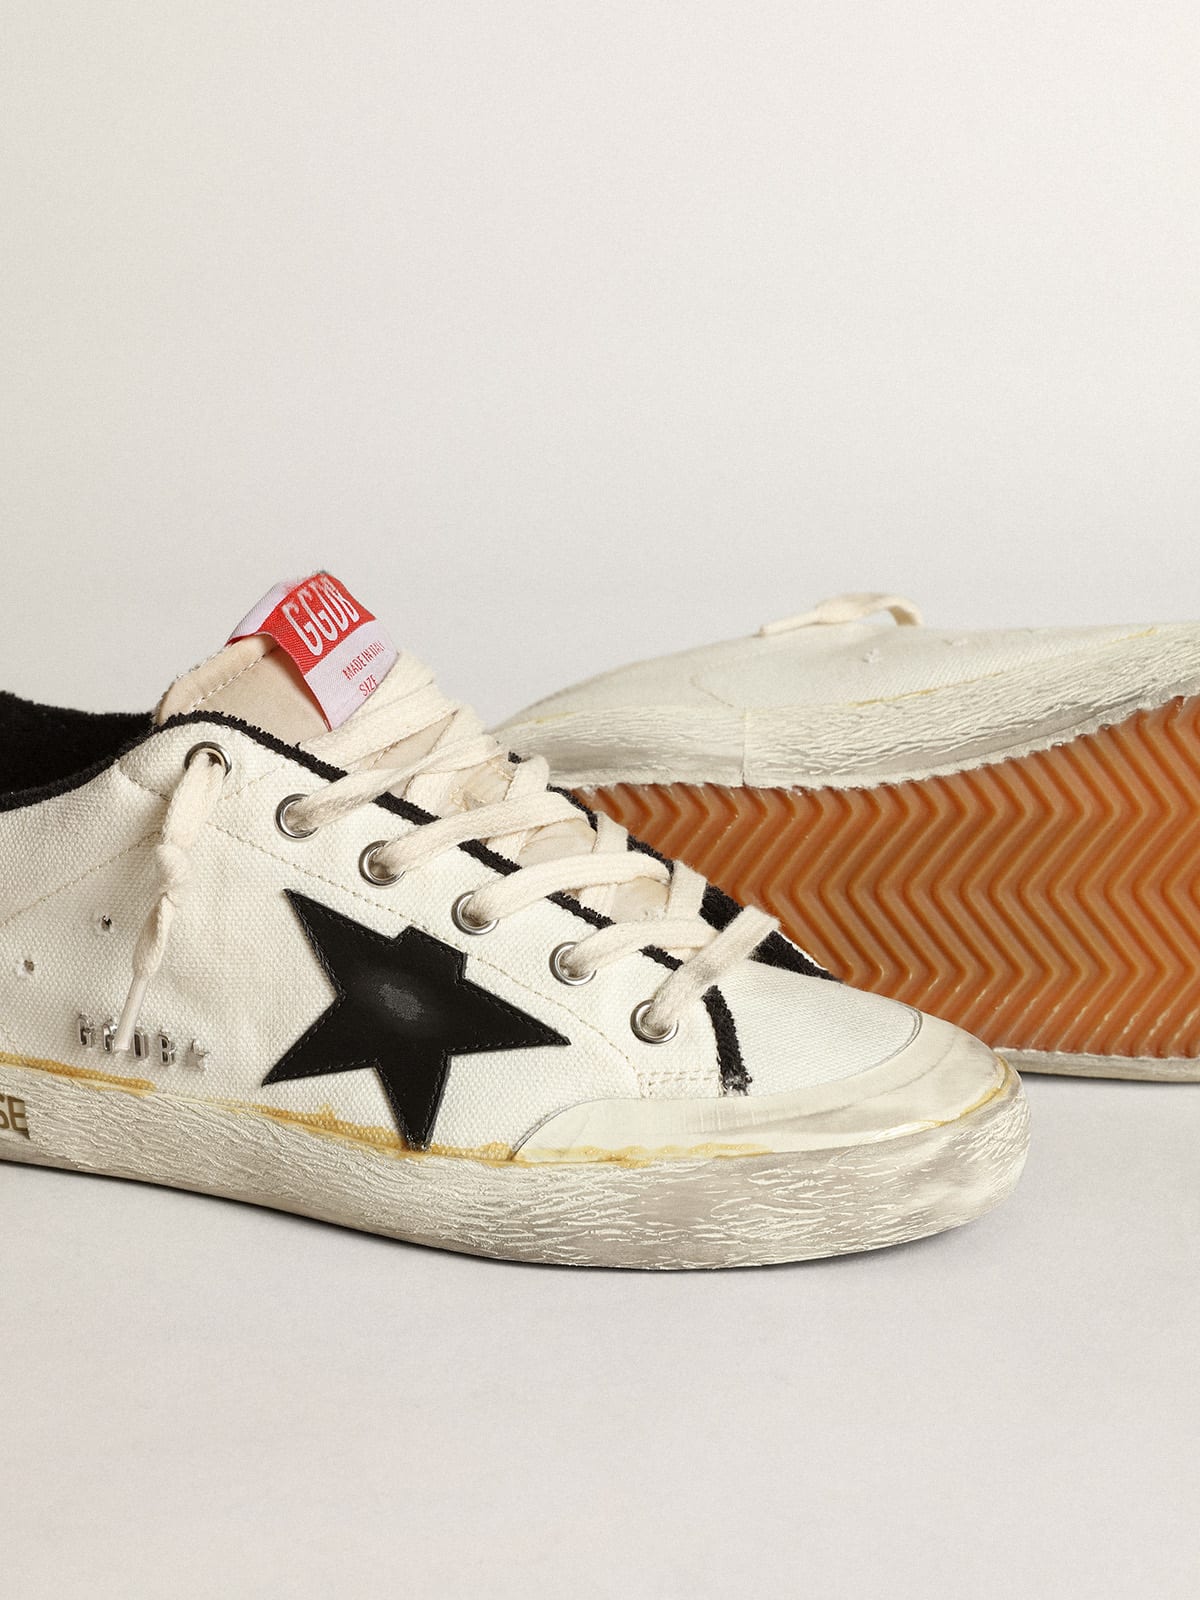 Golden Goose - Men’s Super-Star LTD sneakers in beige canvas with black leather star and white leather heel tab in 